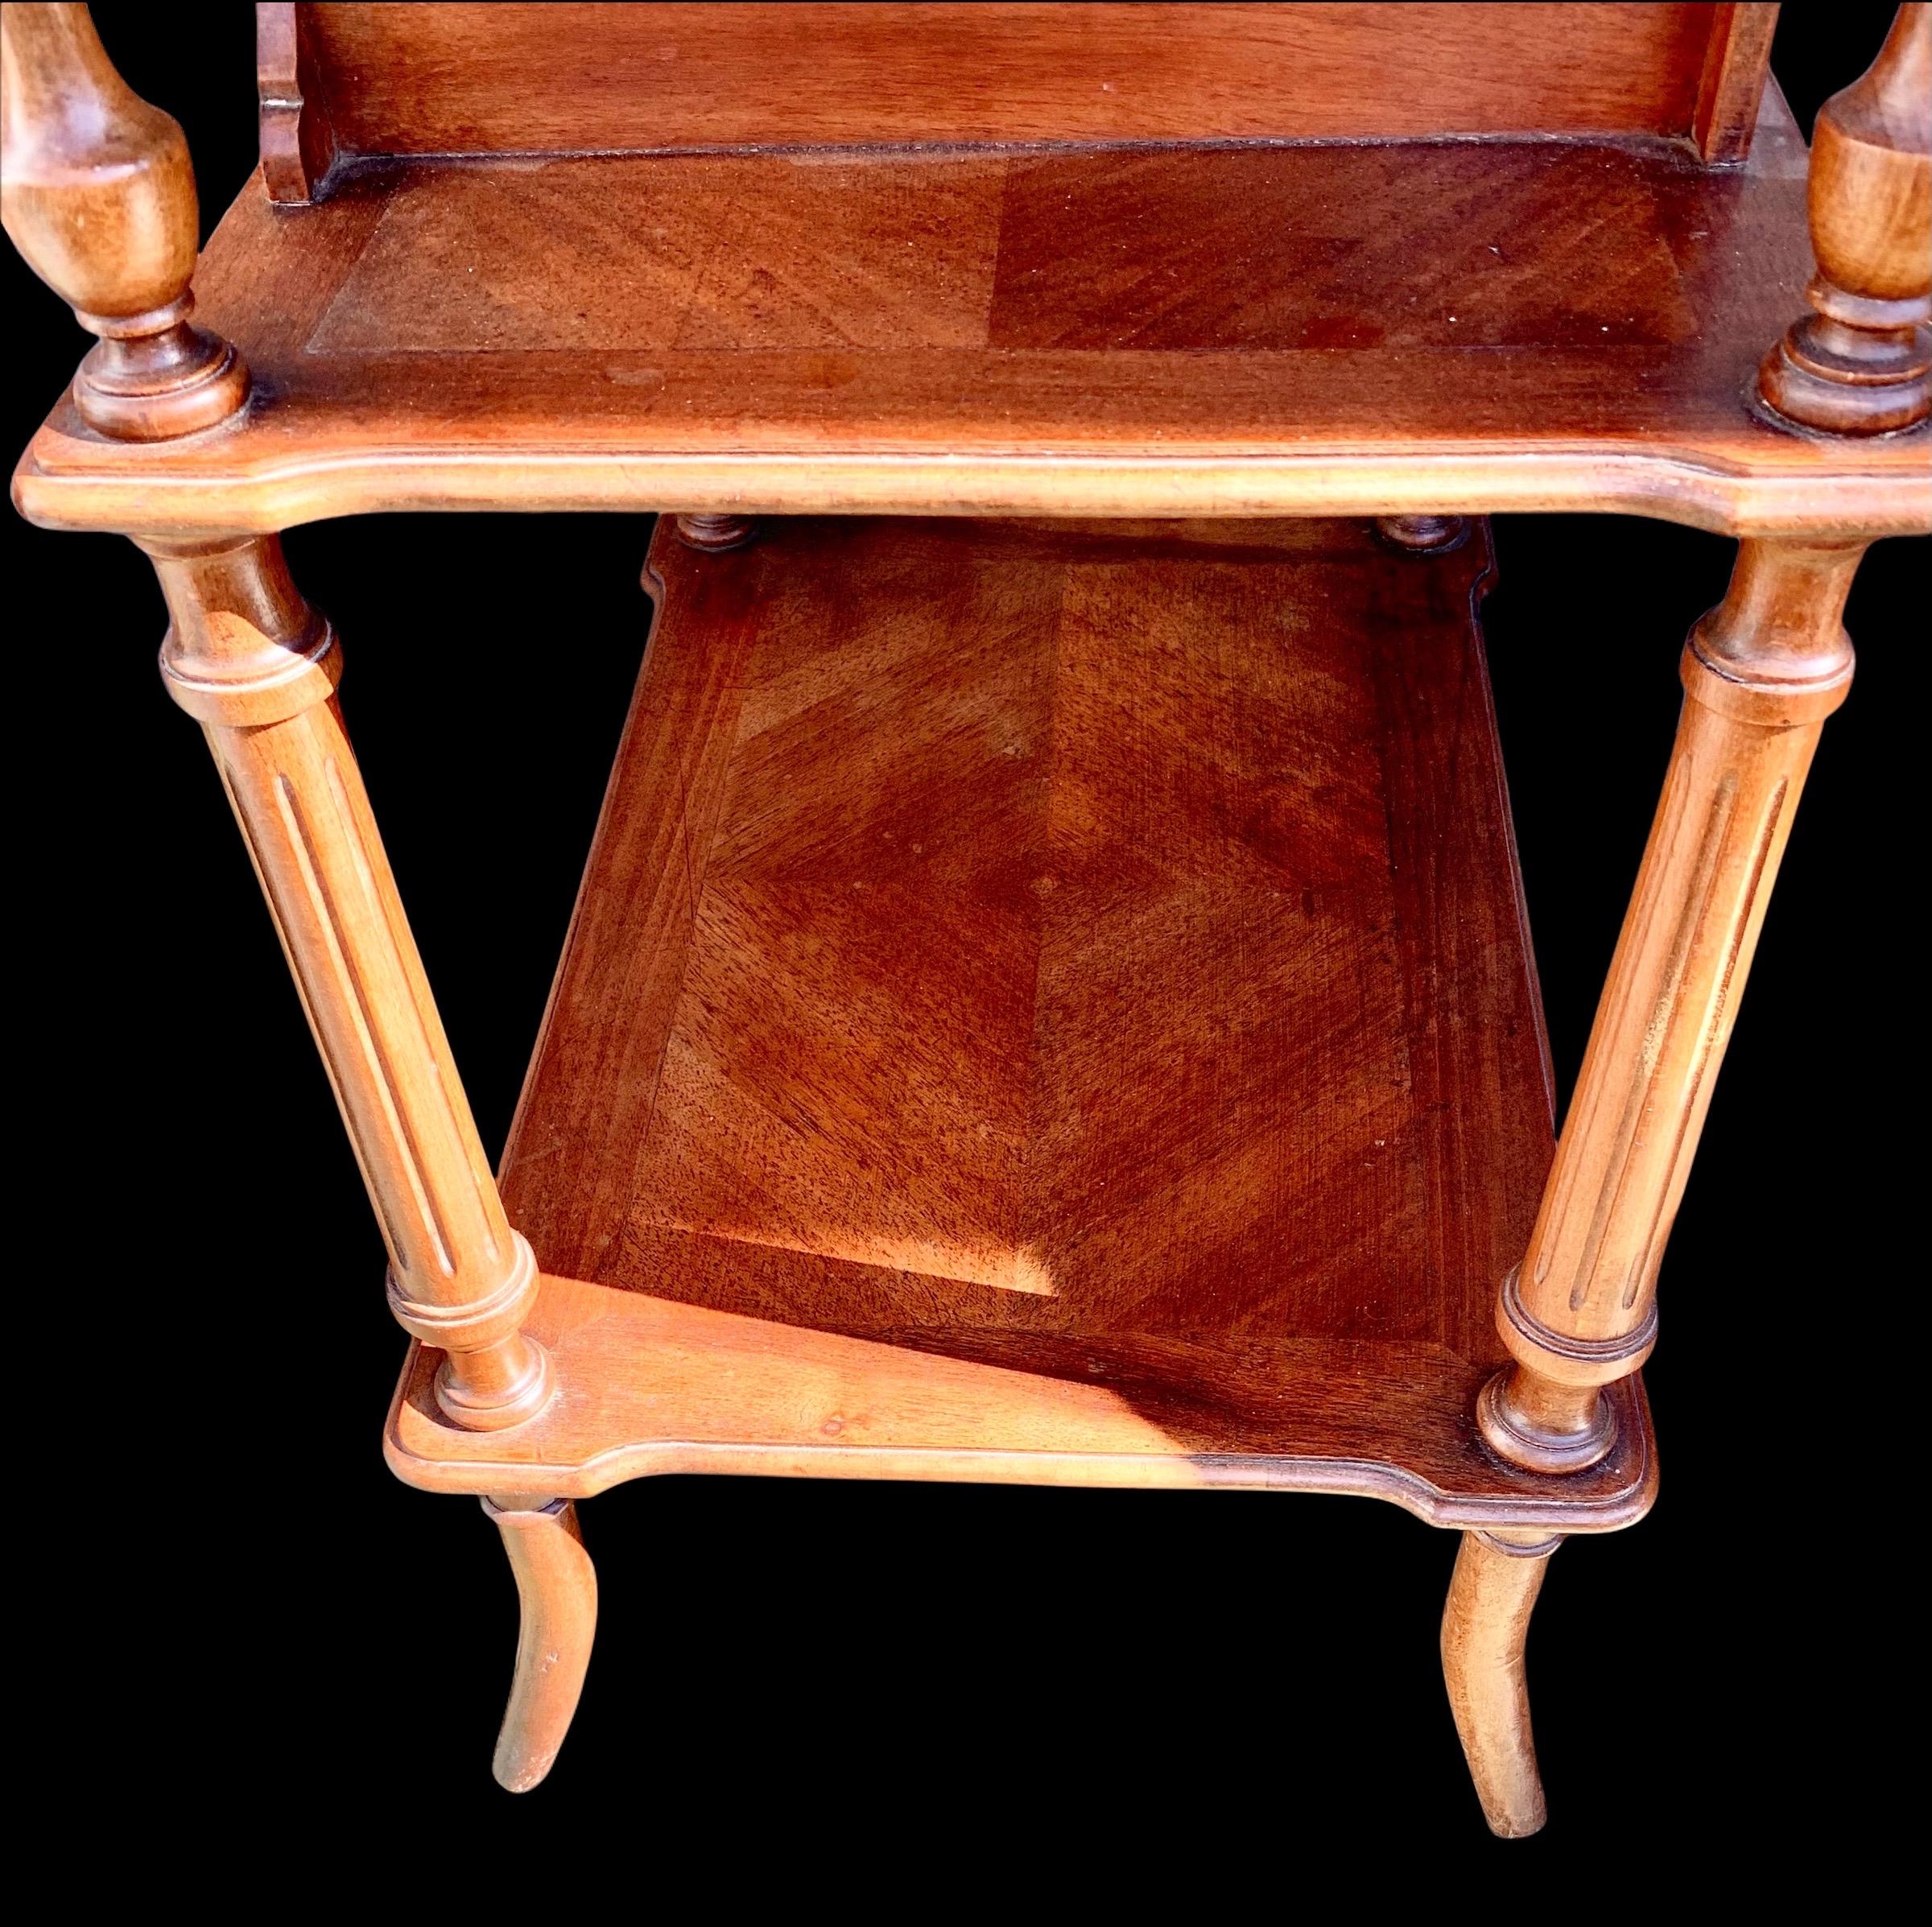 An unusual antique early 20th century French carved walnut dressing/sewing table having a beautiful, shaped chevron inlay top, the locking top lifts to reveal storage compartments and a mirror, above a set of two drawers, a lower shelf and ending in